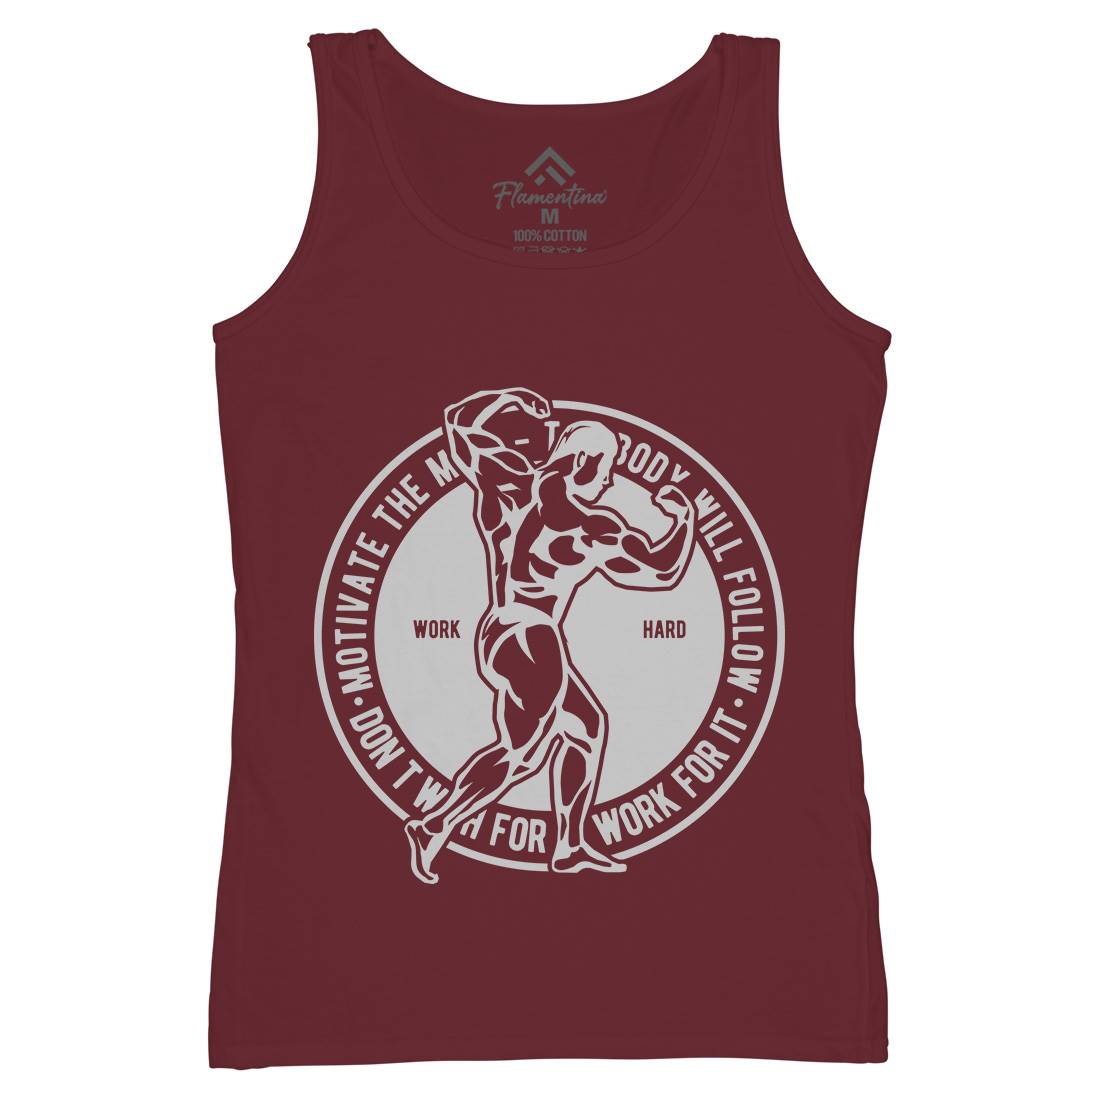 Motivate The Mind Womens Organic Tank Top Vest Gym A716